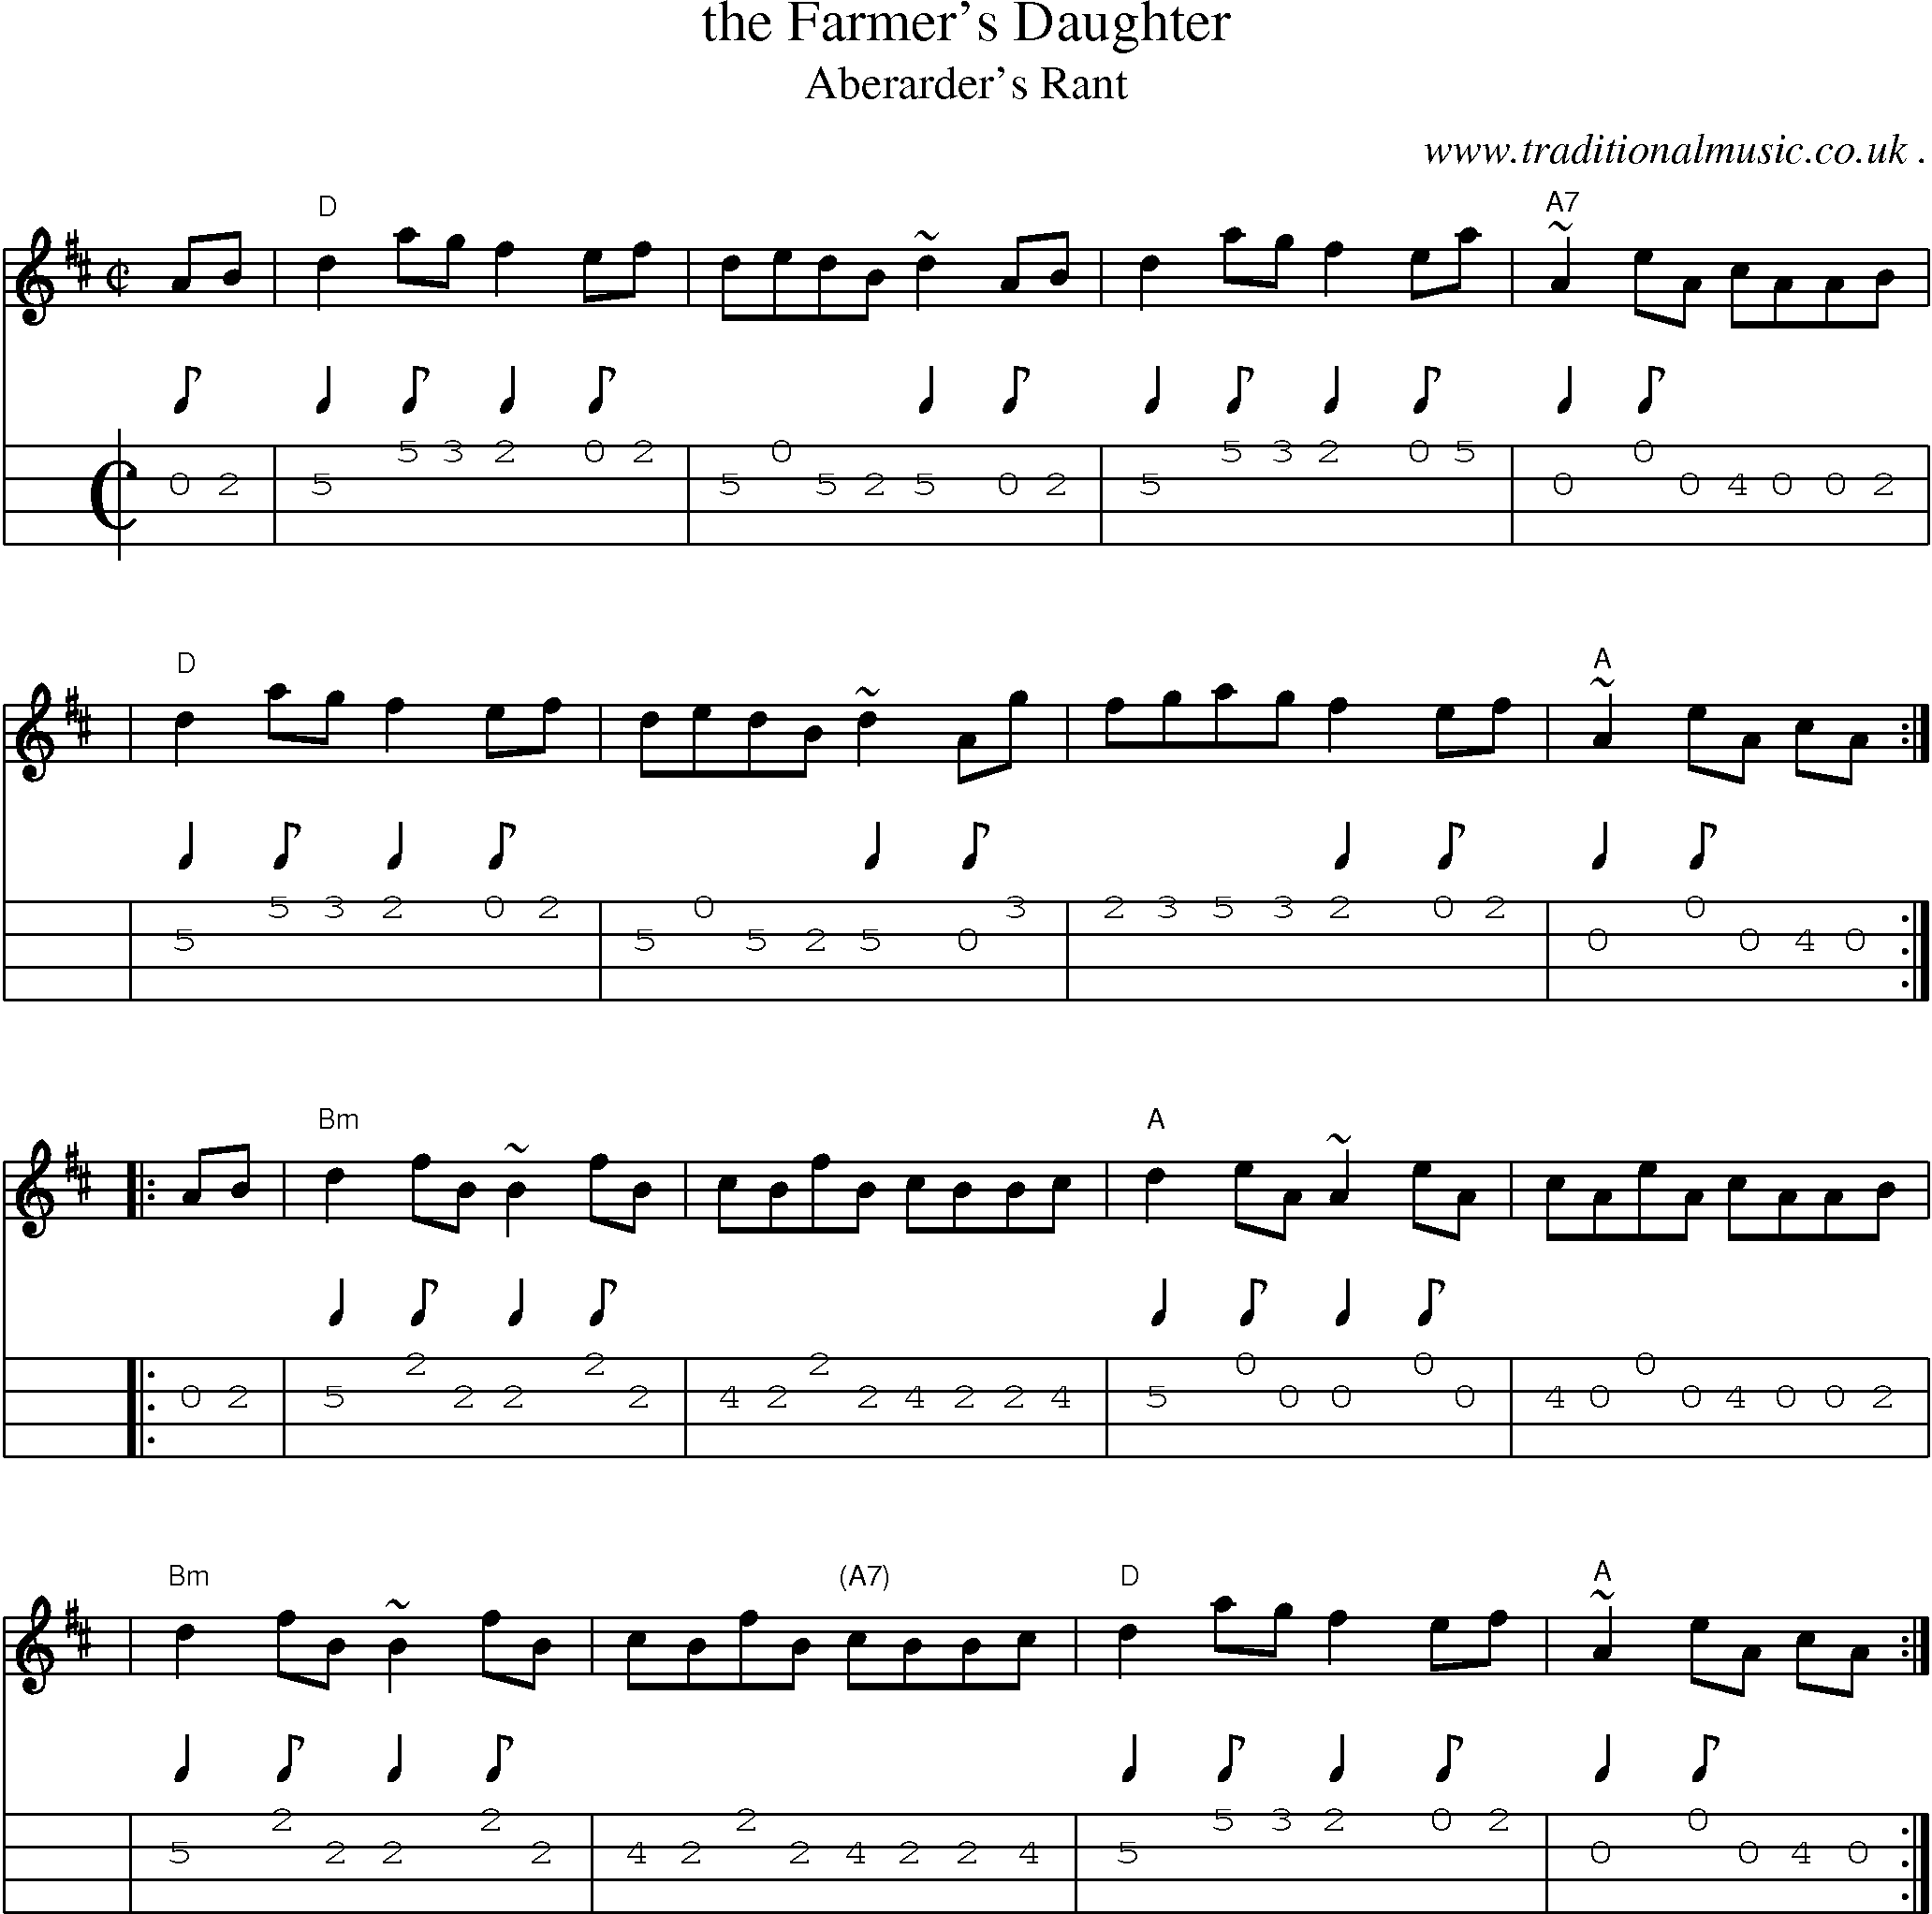 Sheet-music  score, Chords and Mandolin Tabs for The Farmers Daughter